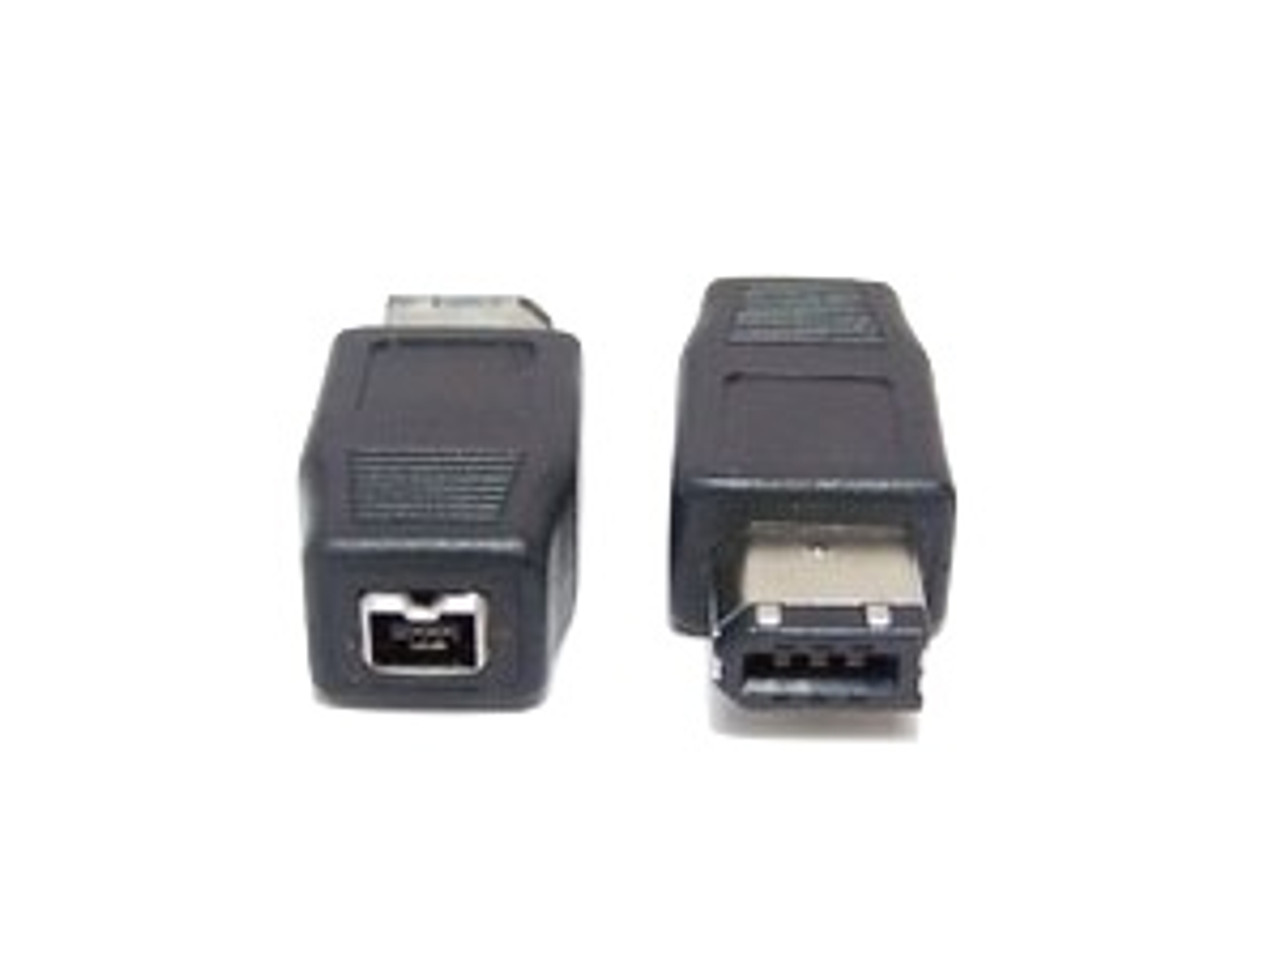 FireWire (IEEE 1394) 6-Pin Male to 4-Pin Female Adapter